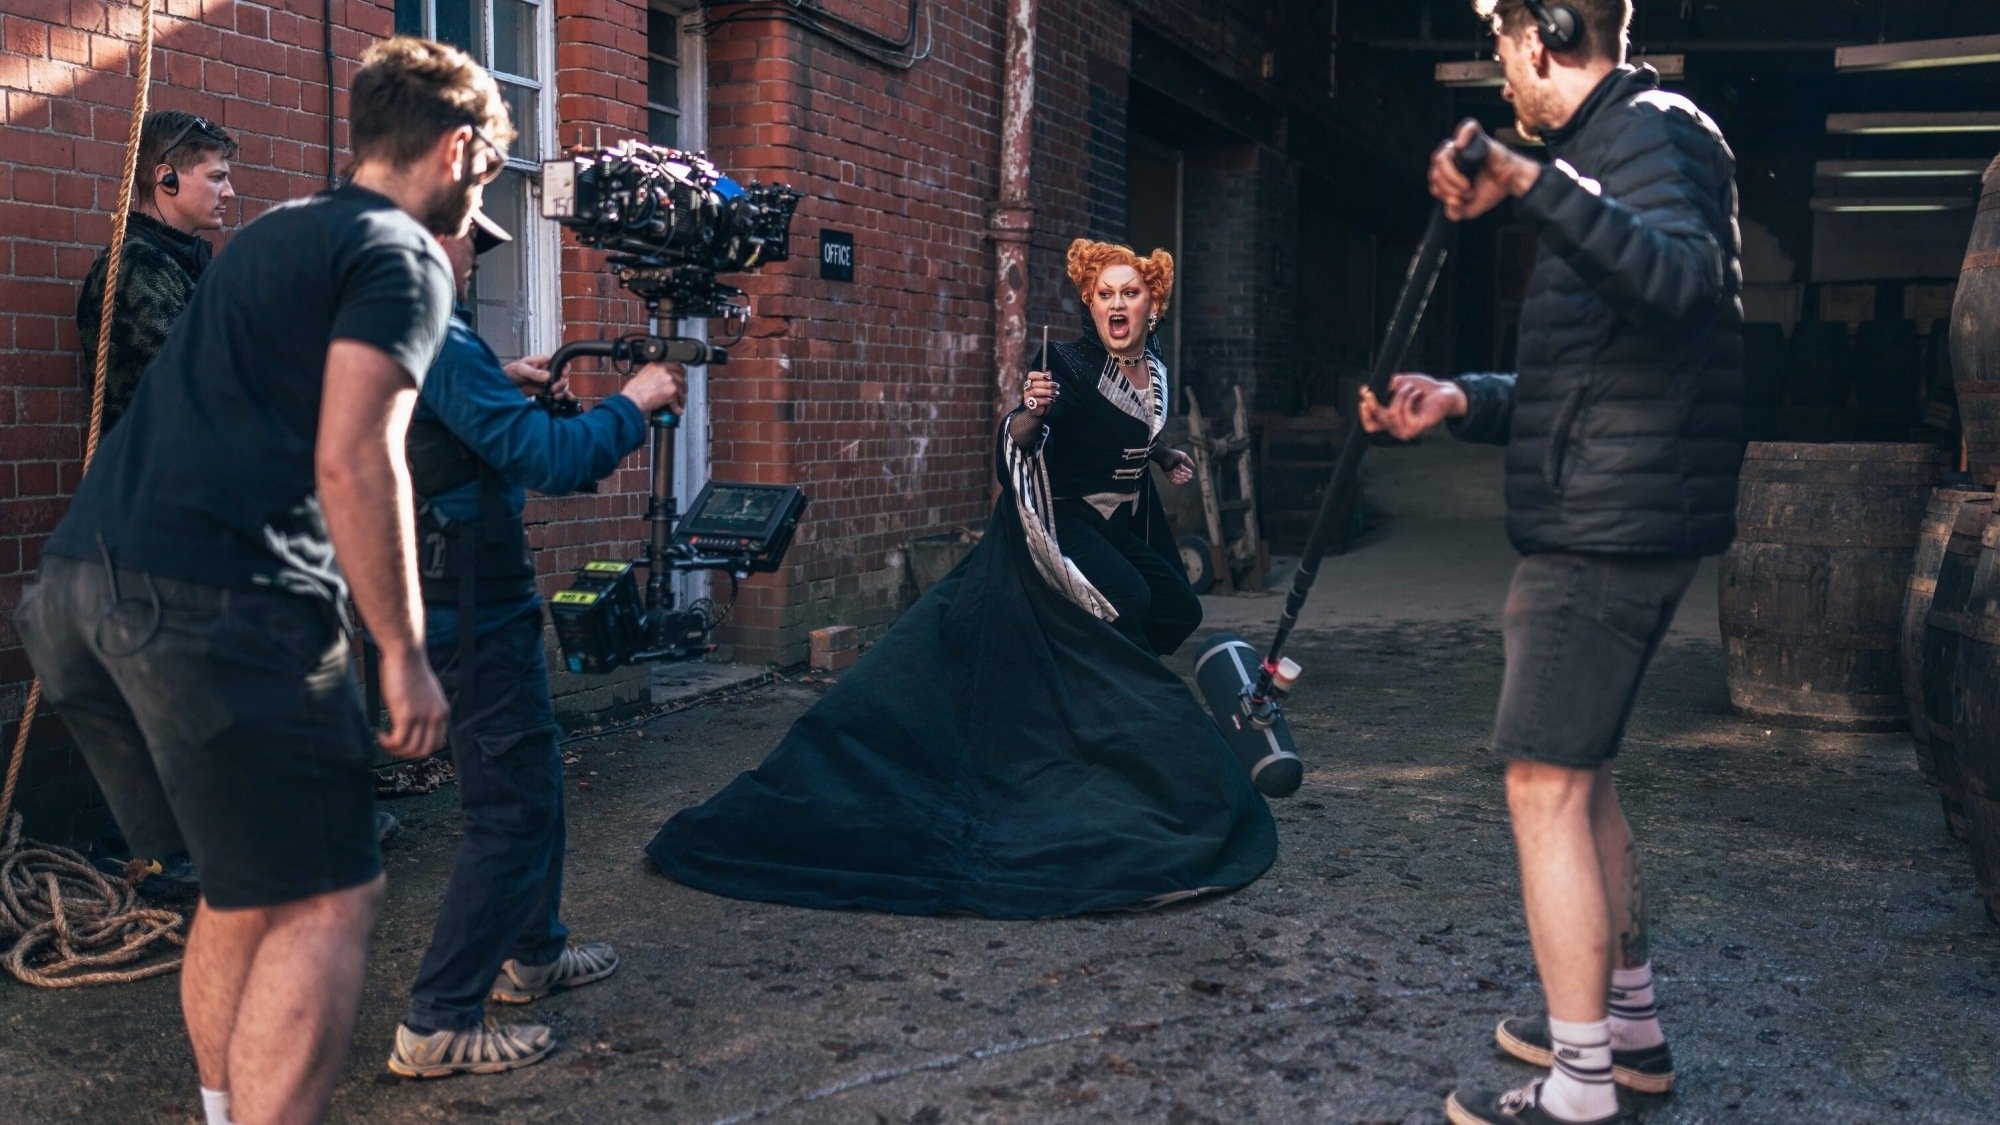 Jinkx Monsoon on the set playing the Maestro in "Doctor Who."